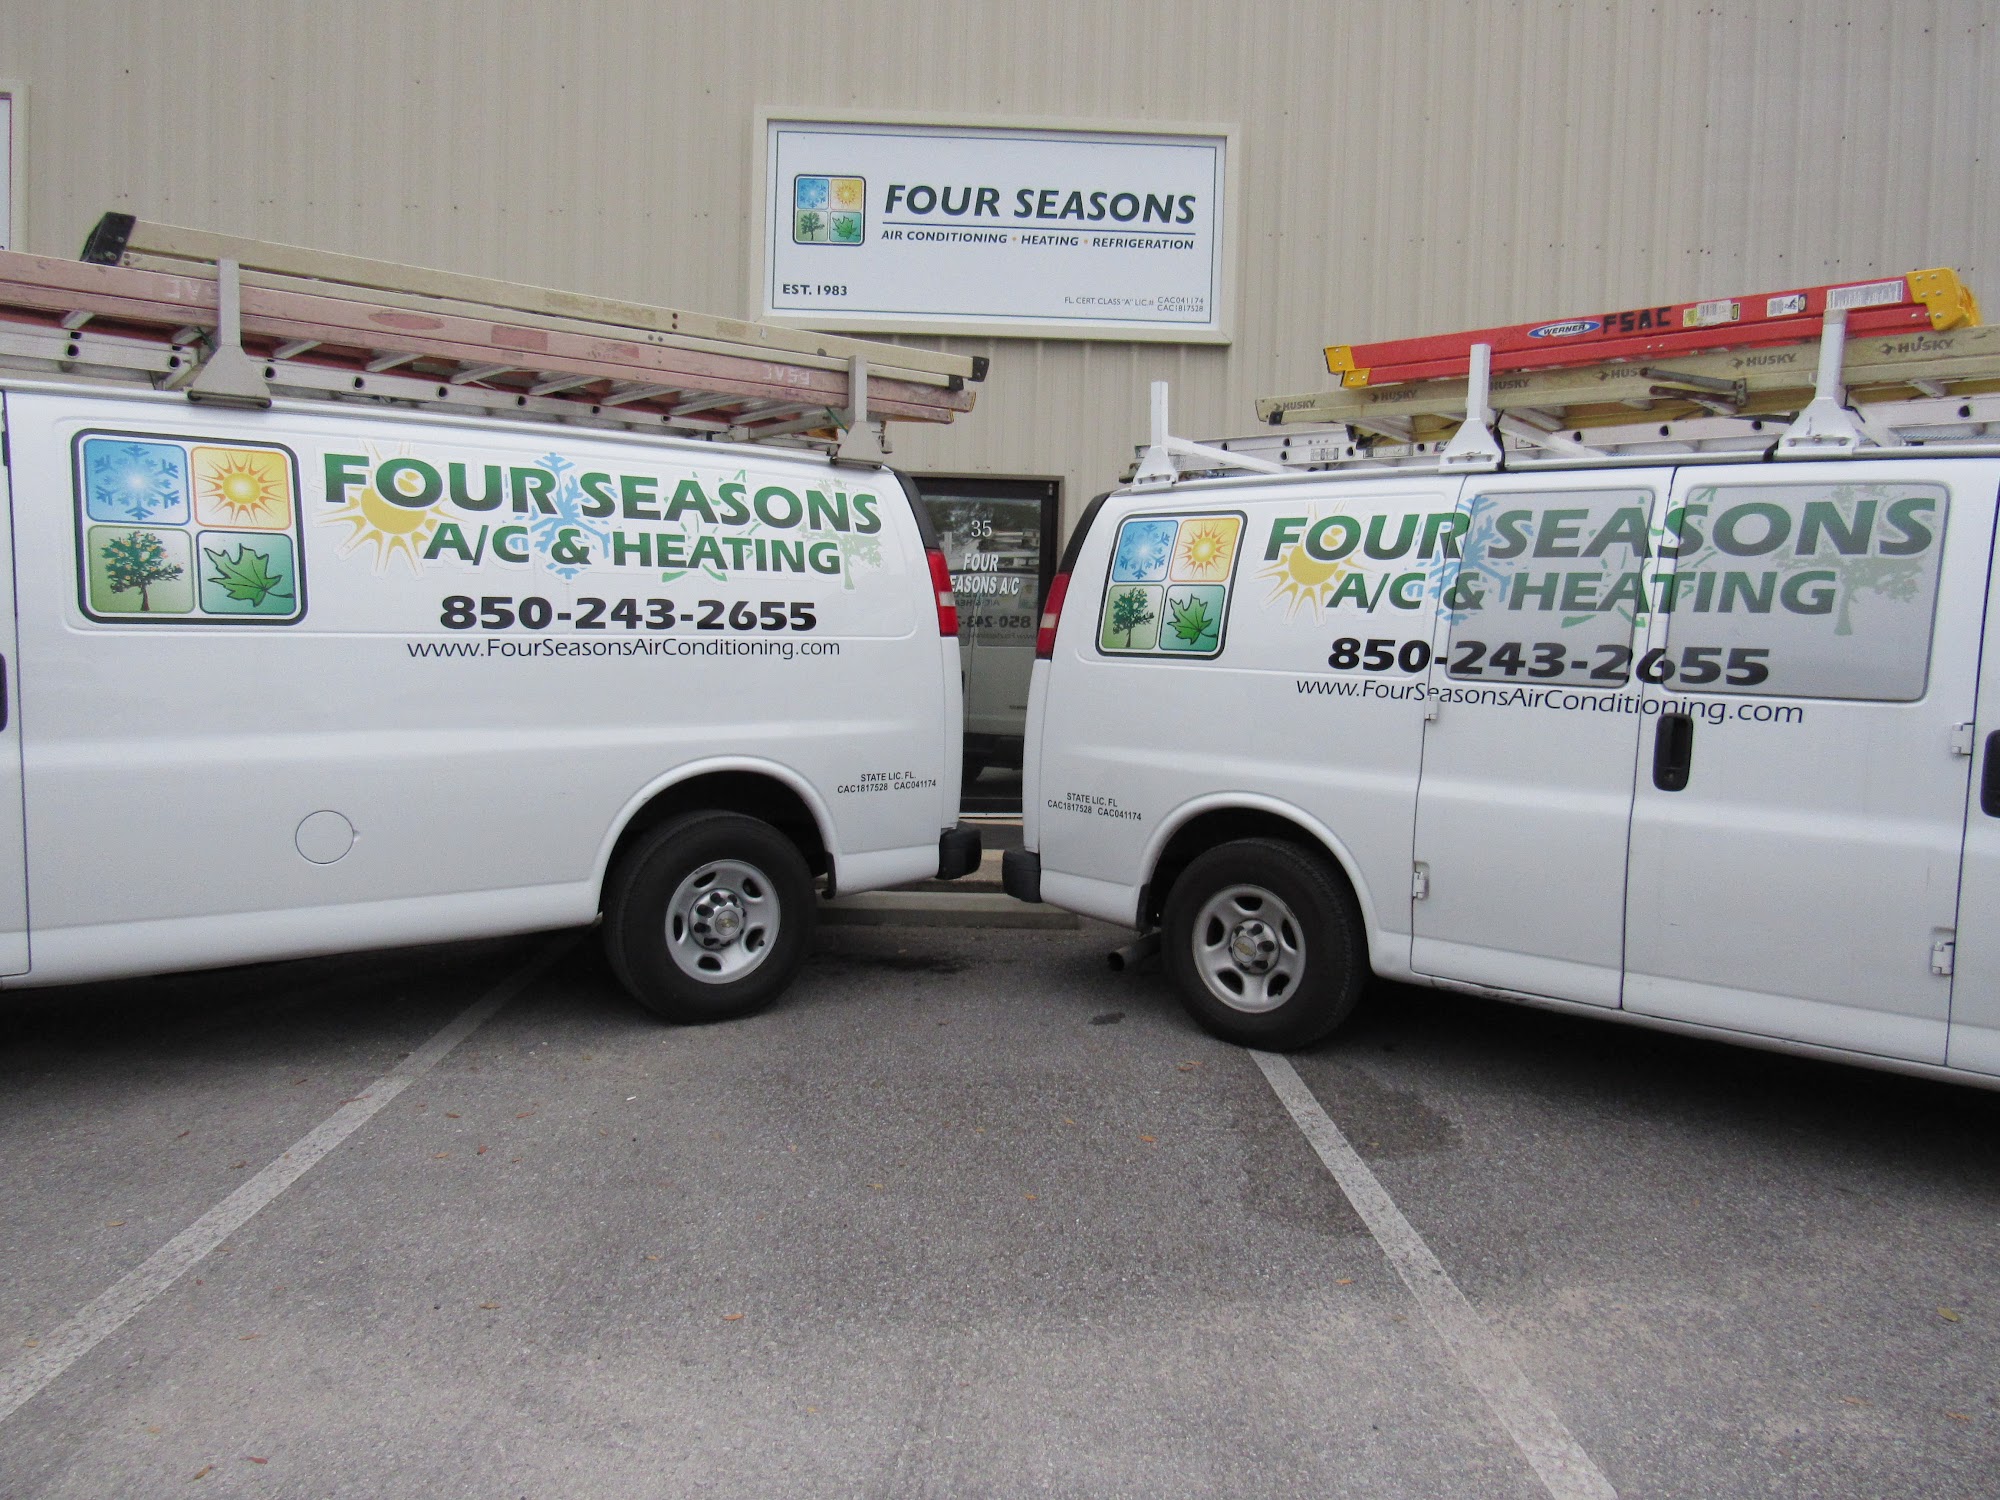 Four Seasons Air Conditioning, Heating & Refrigeration